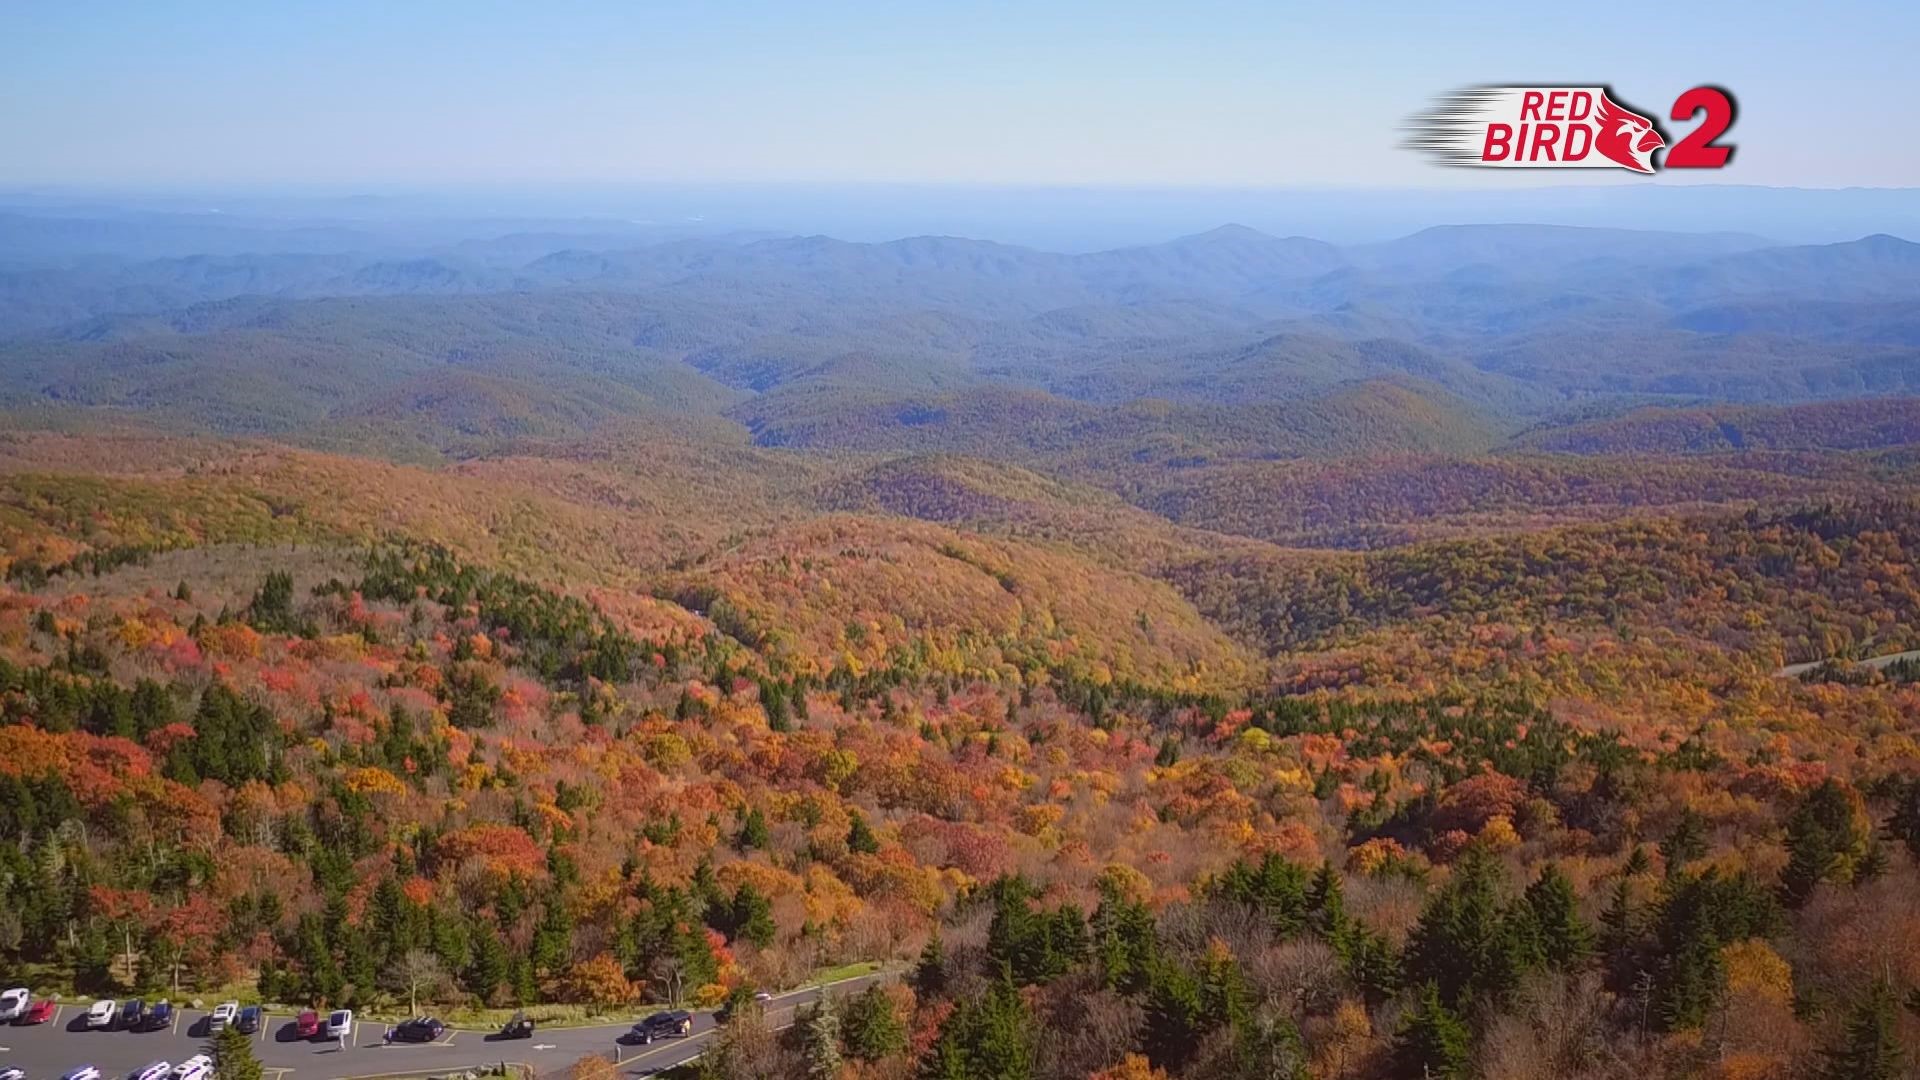 If you want to see the fall colors in the North Carolina mountains, you better make a trip soon!